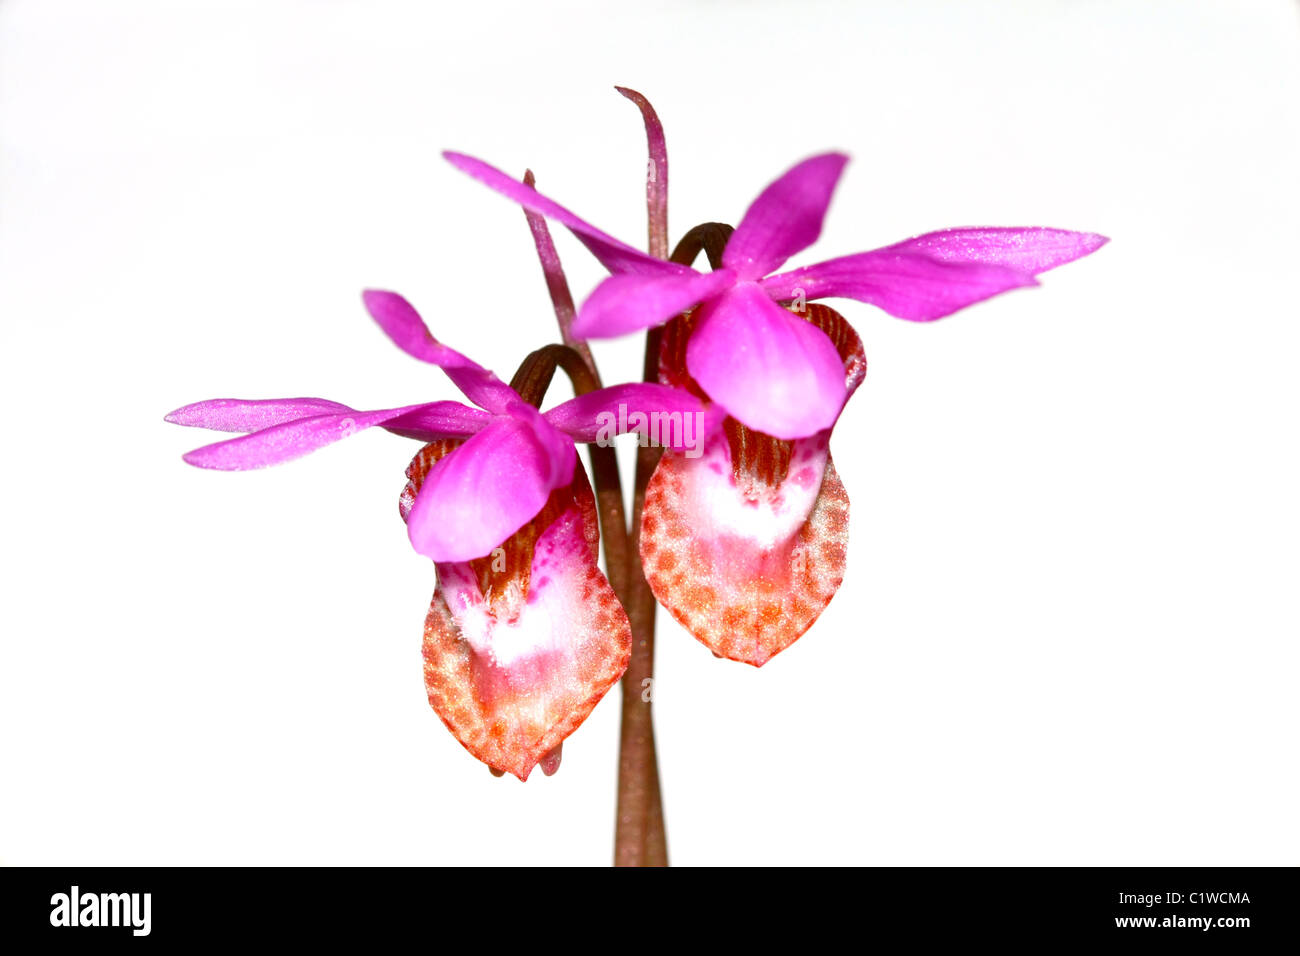 The small Calypso orchid (Calypso bulbosa) is a dainty pink and maroon wildflower commonly found in forested areas. Stock Photo